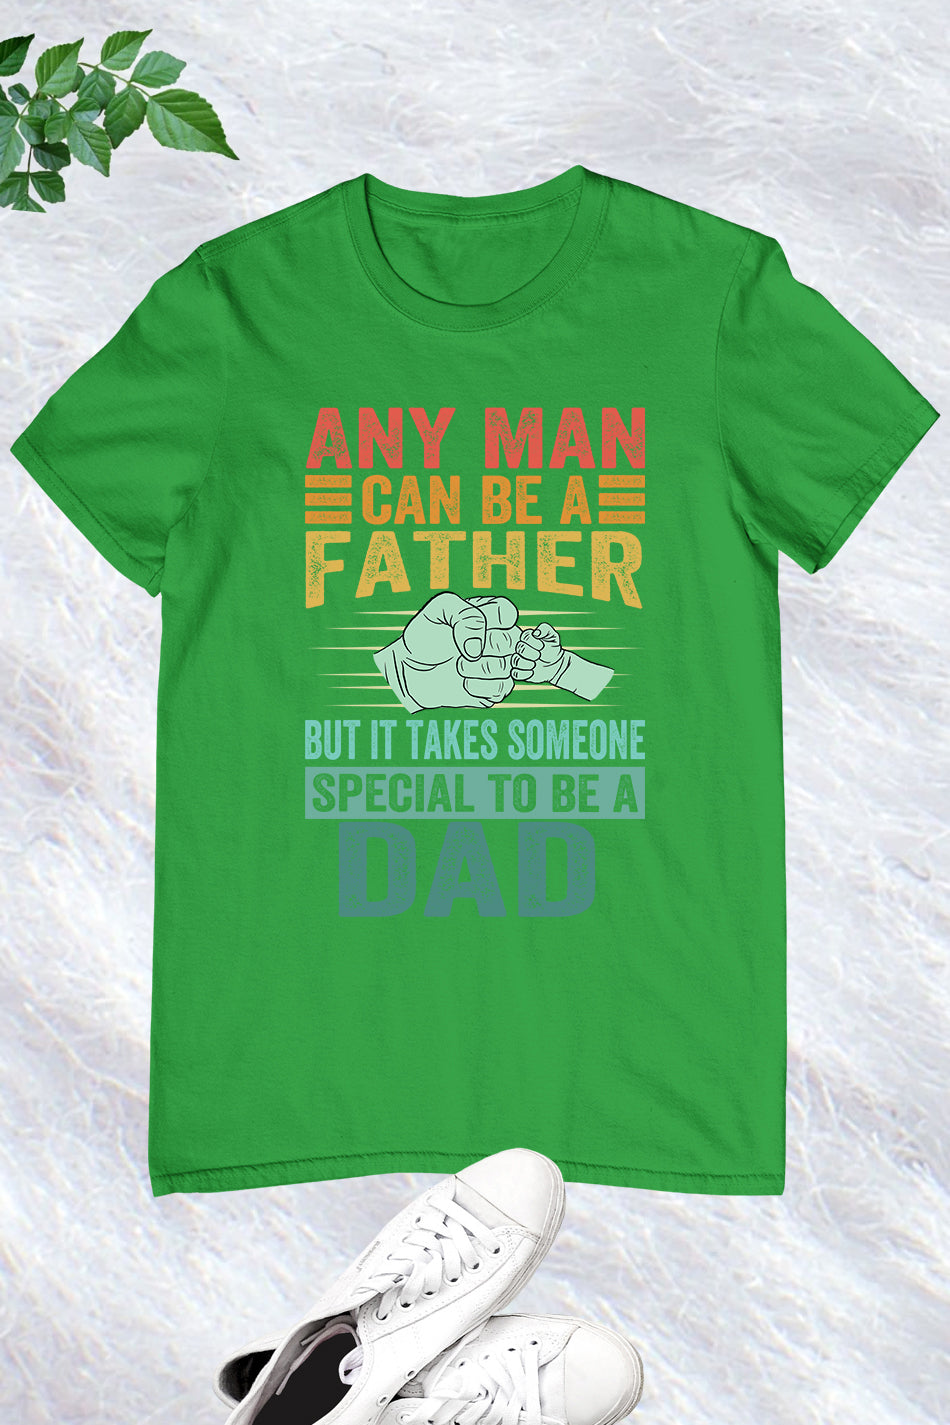 But It Takes Someone Special To Be A Dad Shirt